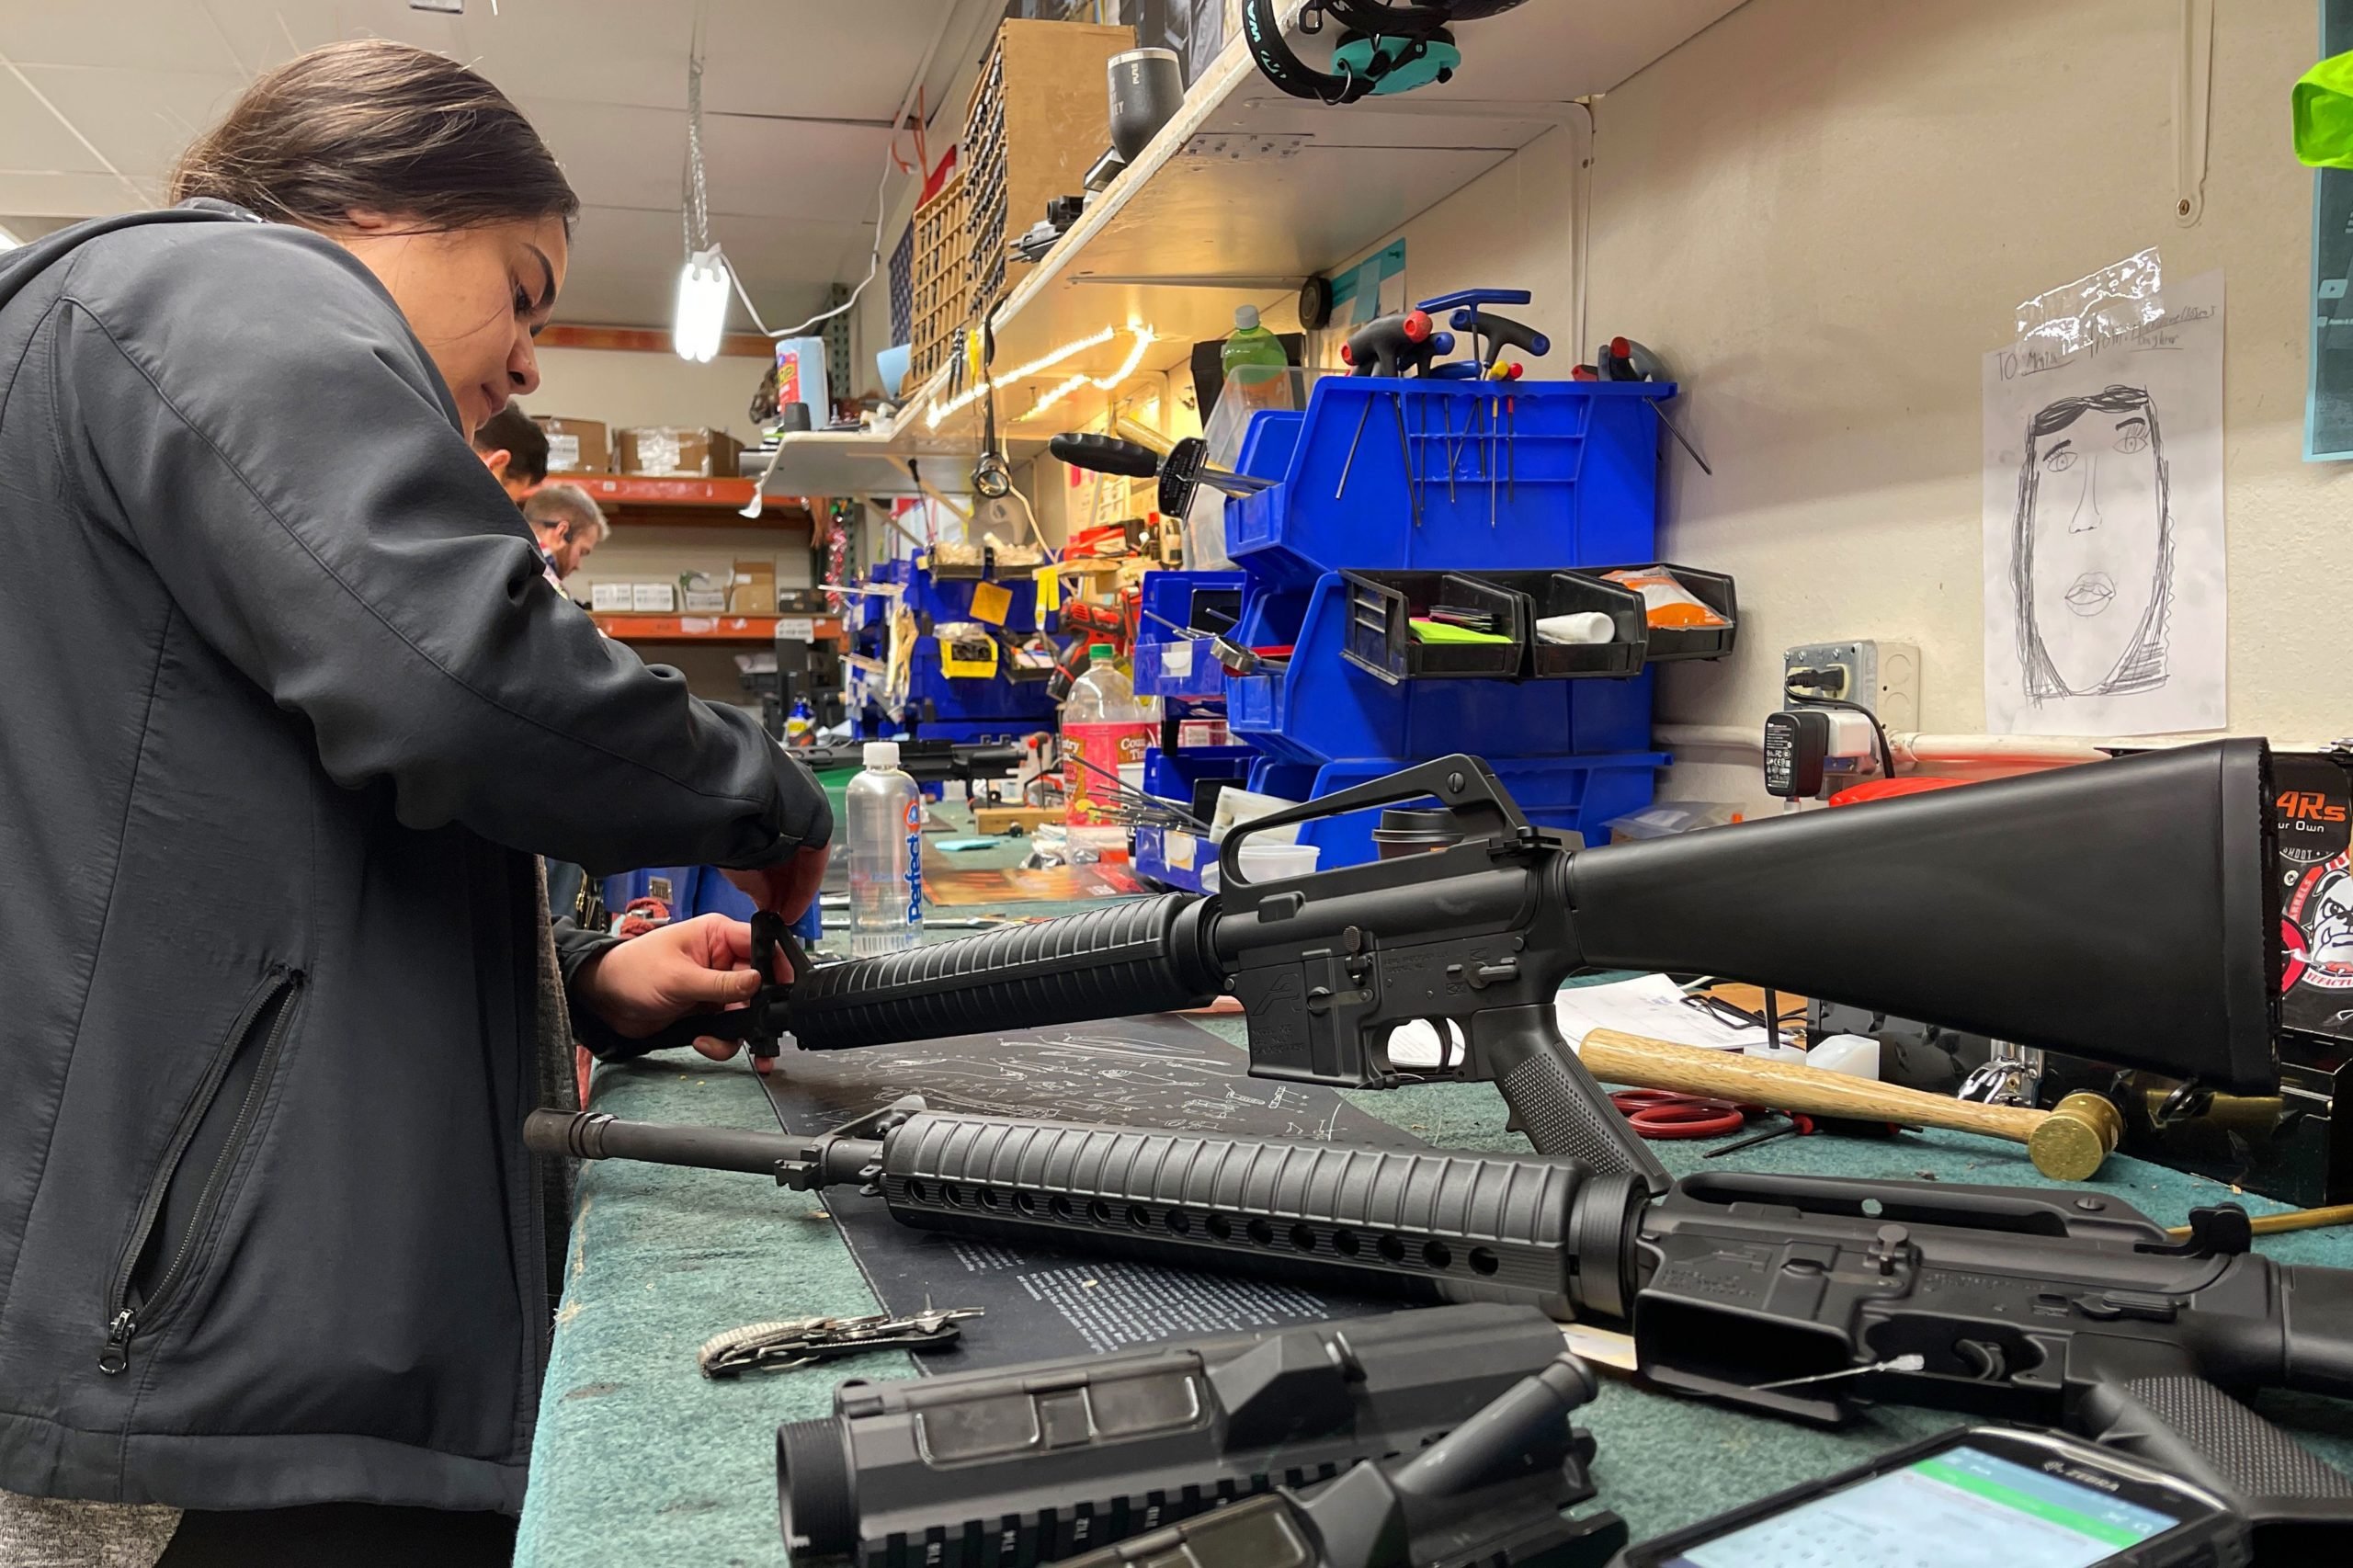 A worker assembles AR-15 style rifles at Davidson Defense in Orem, Utah on February 4, 2021. - Gun merchants sold more than 2 million firearms in January, a 75% increase over the estimated 1.2 million guns sold in January 2020, according to the National Shooting Sports Federation, a firearms industry trade group. The FBI said it conducted a record 4.3 million background checks in January. If that pace continues, the bureau will complete more than 50 million gun-related background checks by the end of the year, shattering the current record set in 2020, according to a new report from Bespoke Investment Group. (Photo by GEORGE FREY / AFP) (Photo by GEORGE FREY/AFP via Getty Images)